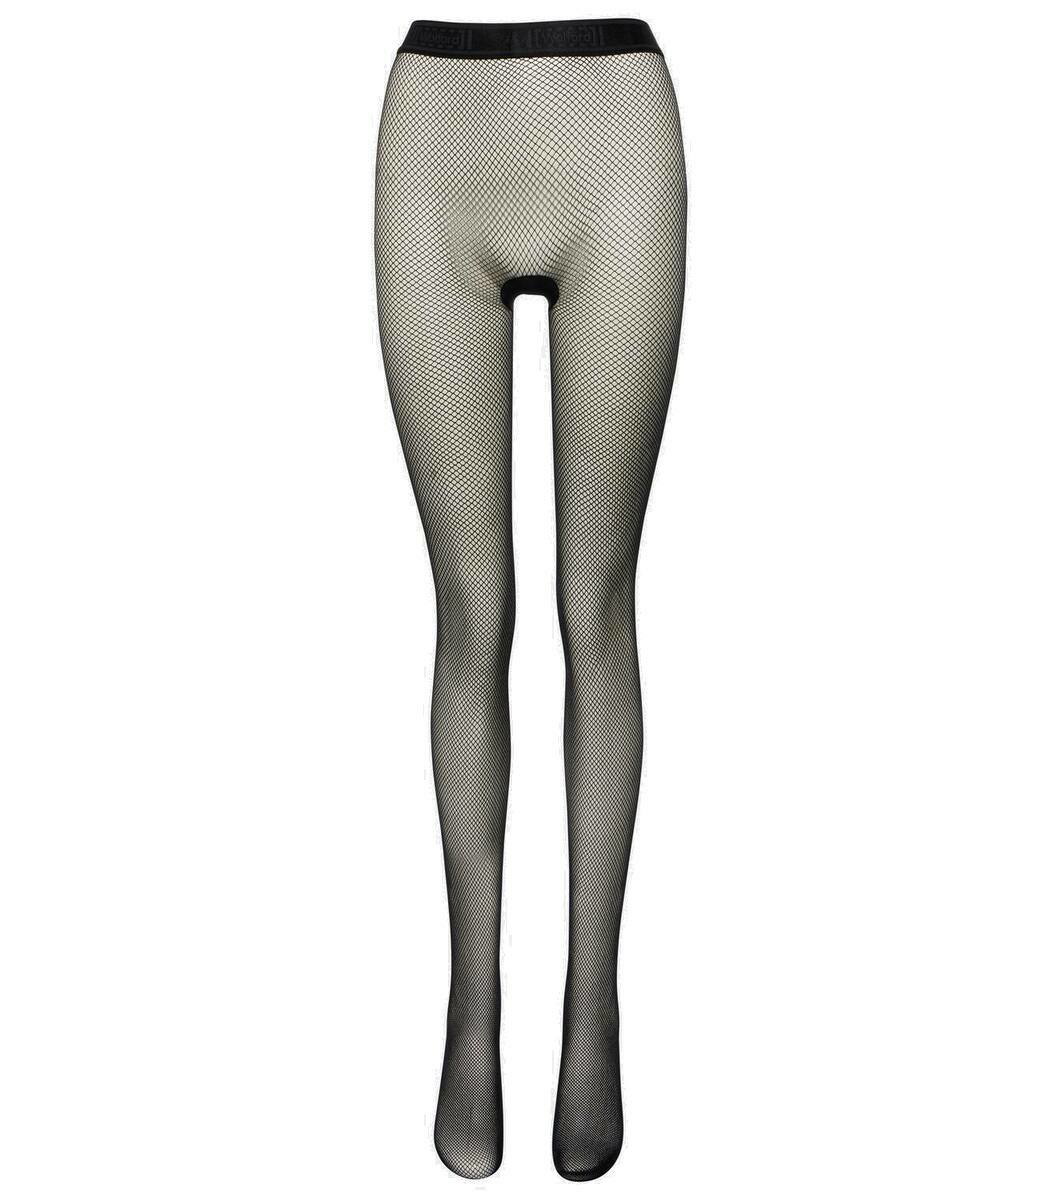 Wolford's Swarovski-Studded Holiday Tights Come With $1,200 Price Tag –  Rvce News